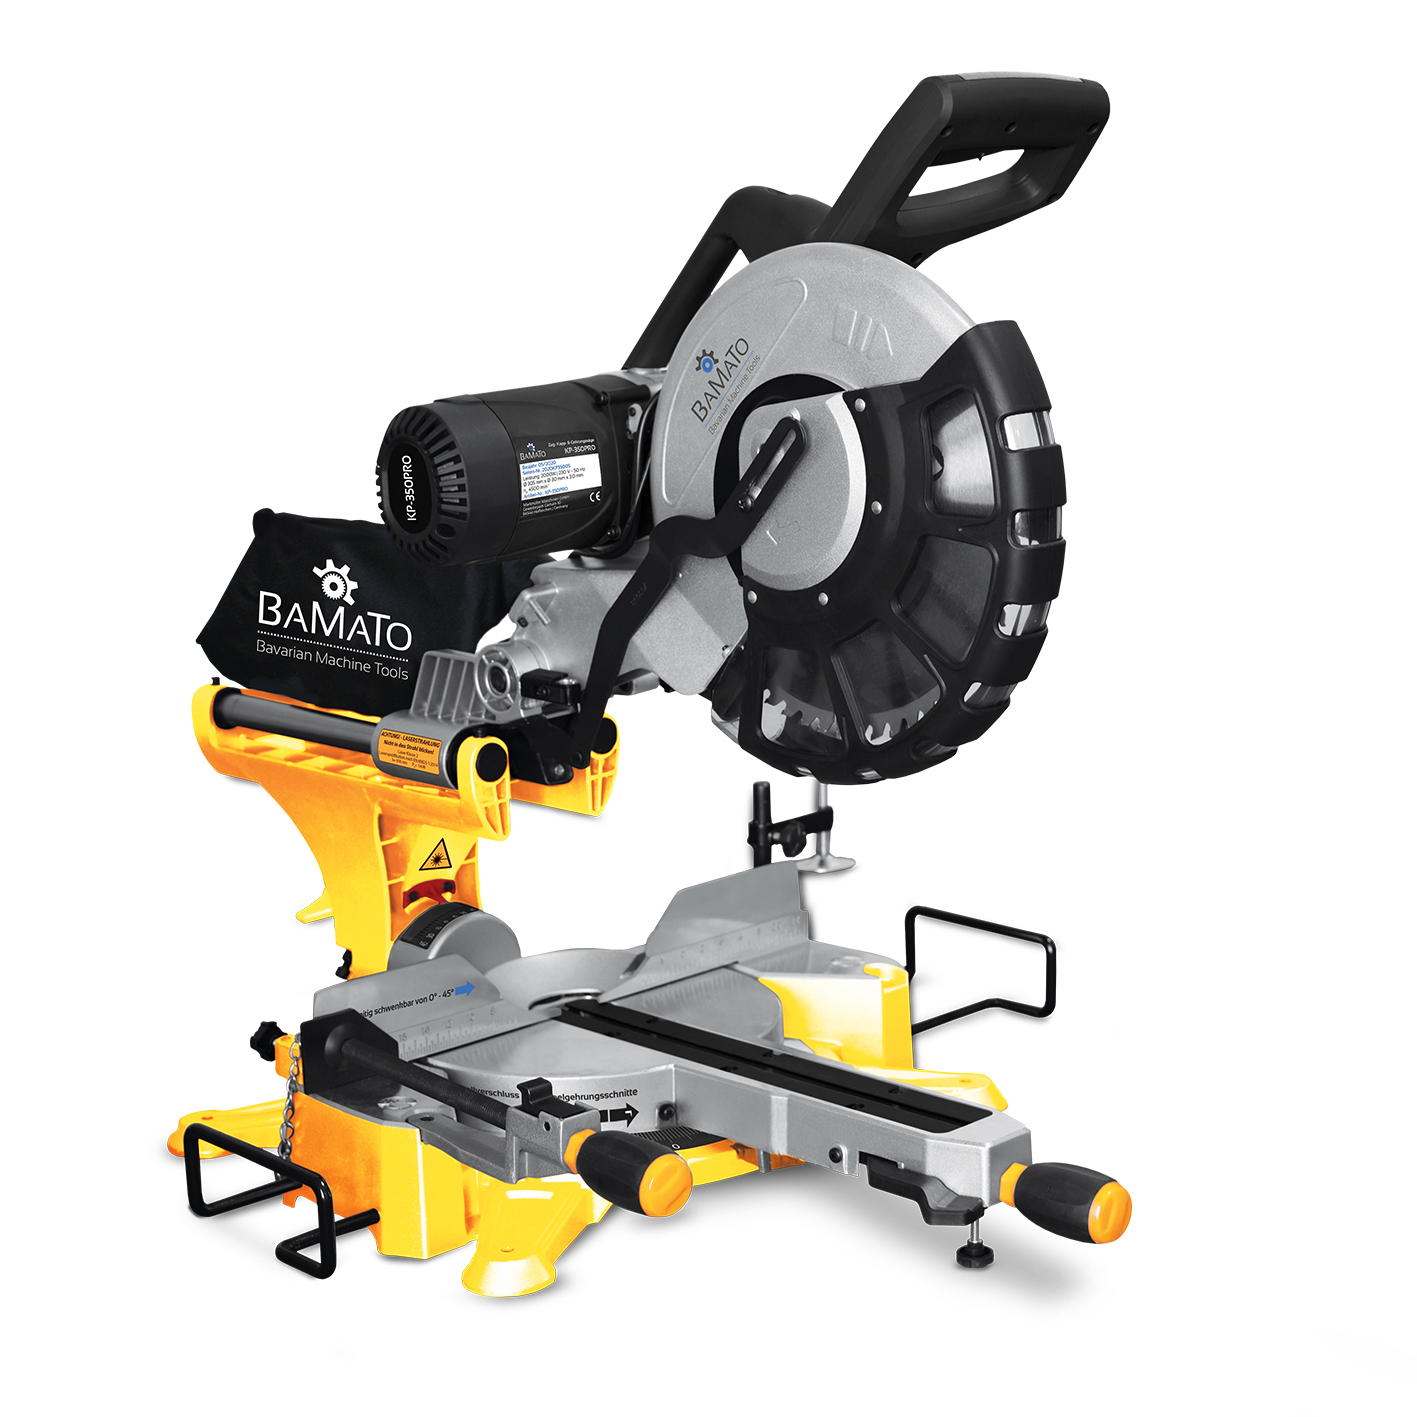 BAMATO Crosscut and mitre saw KP-350PRO with softstart online